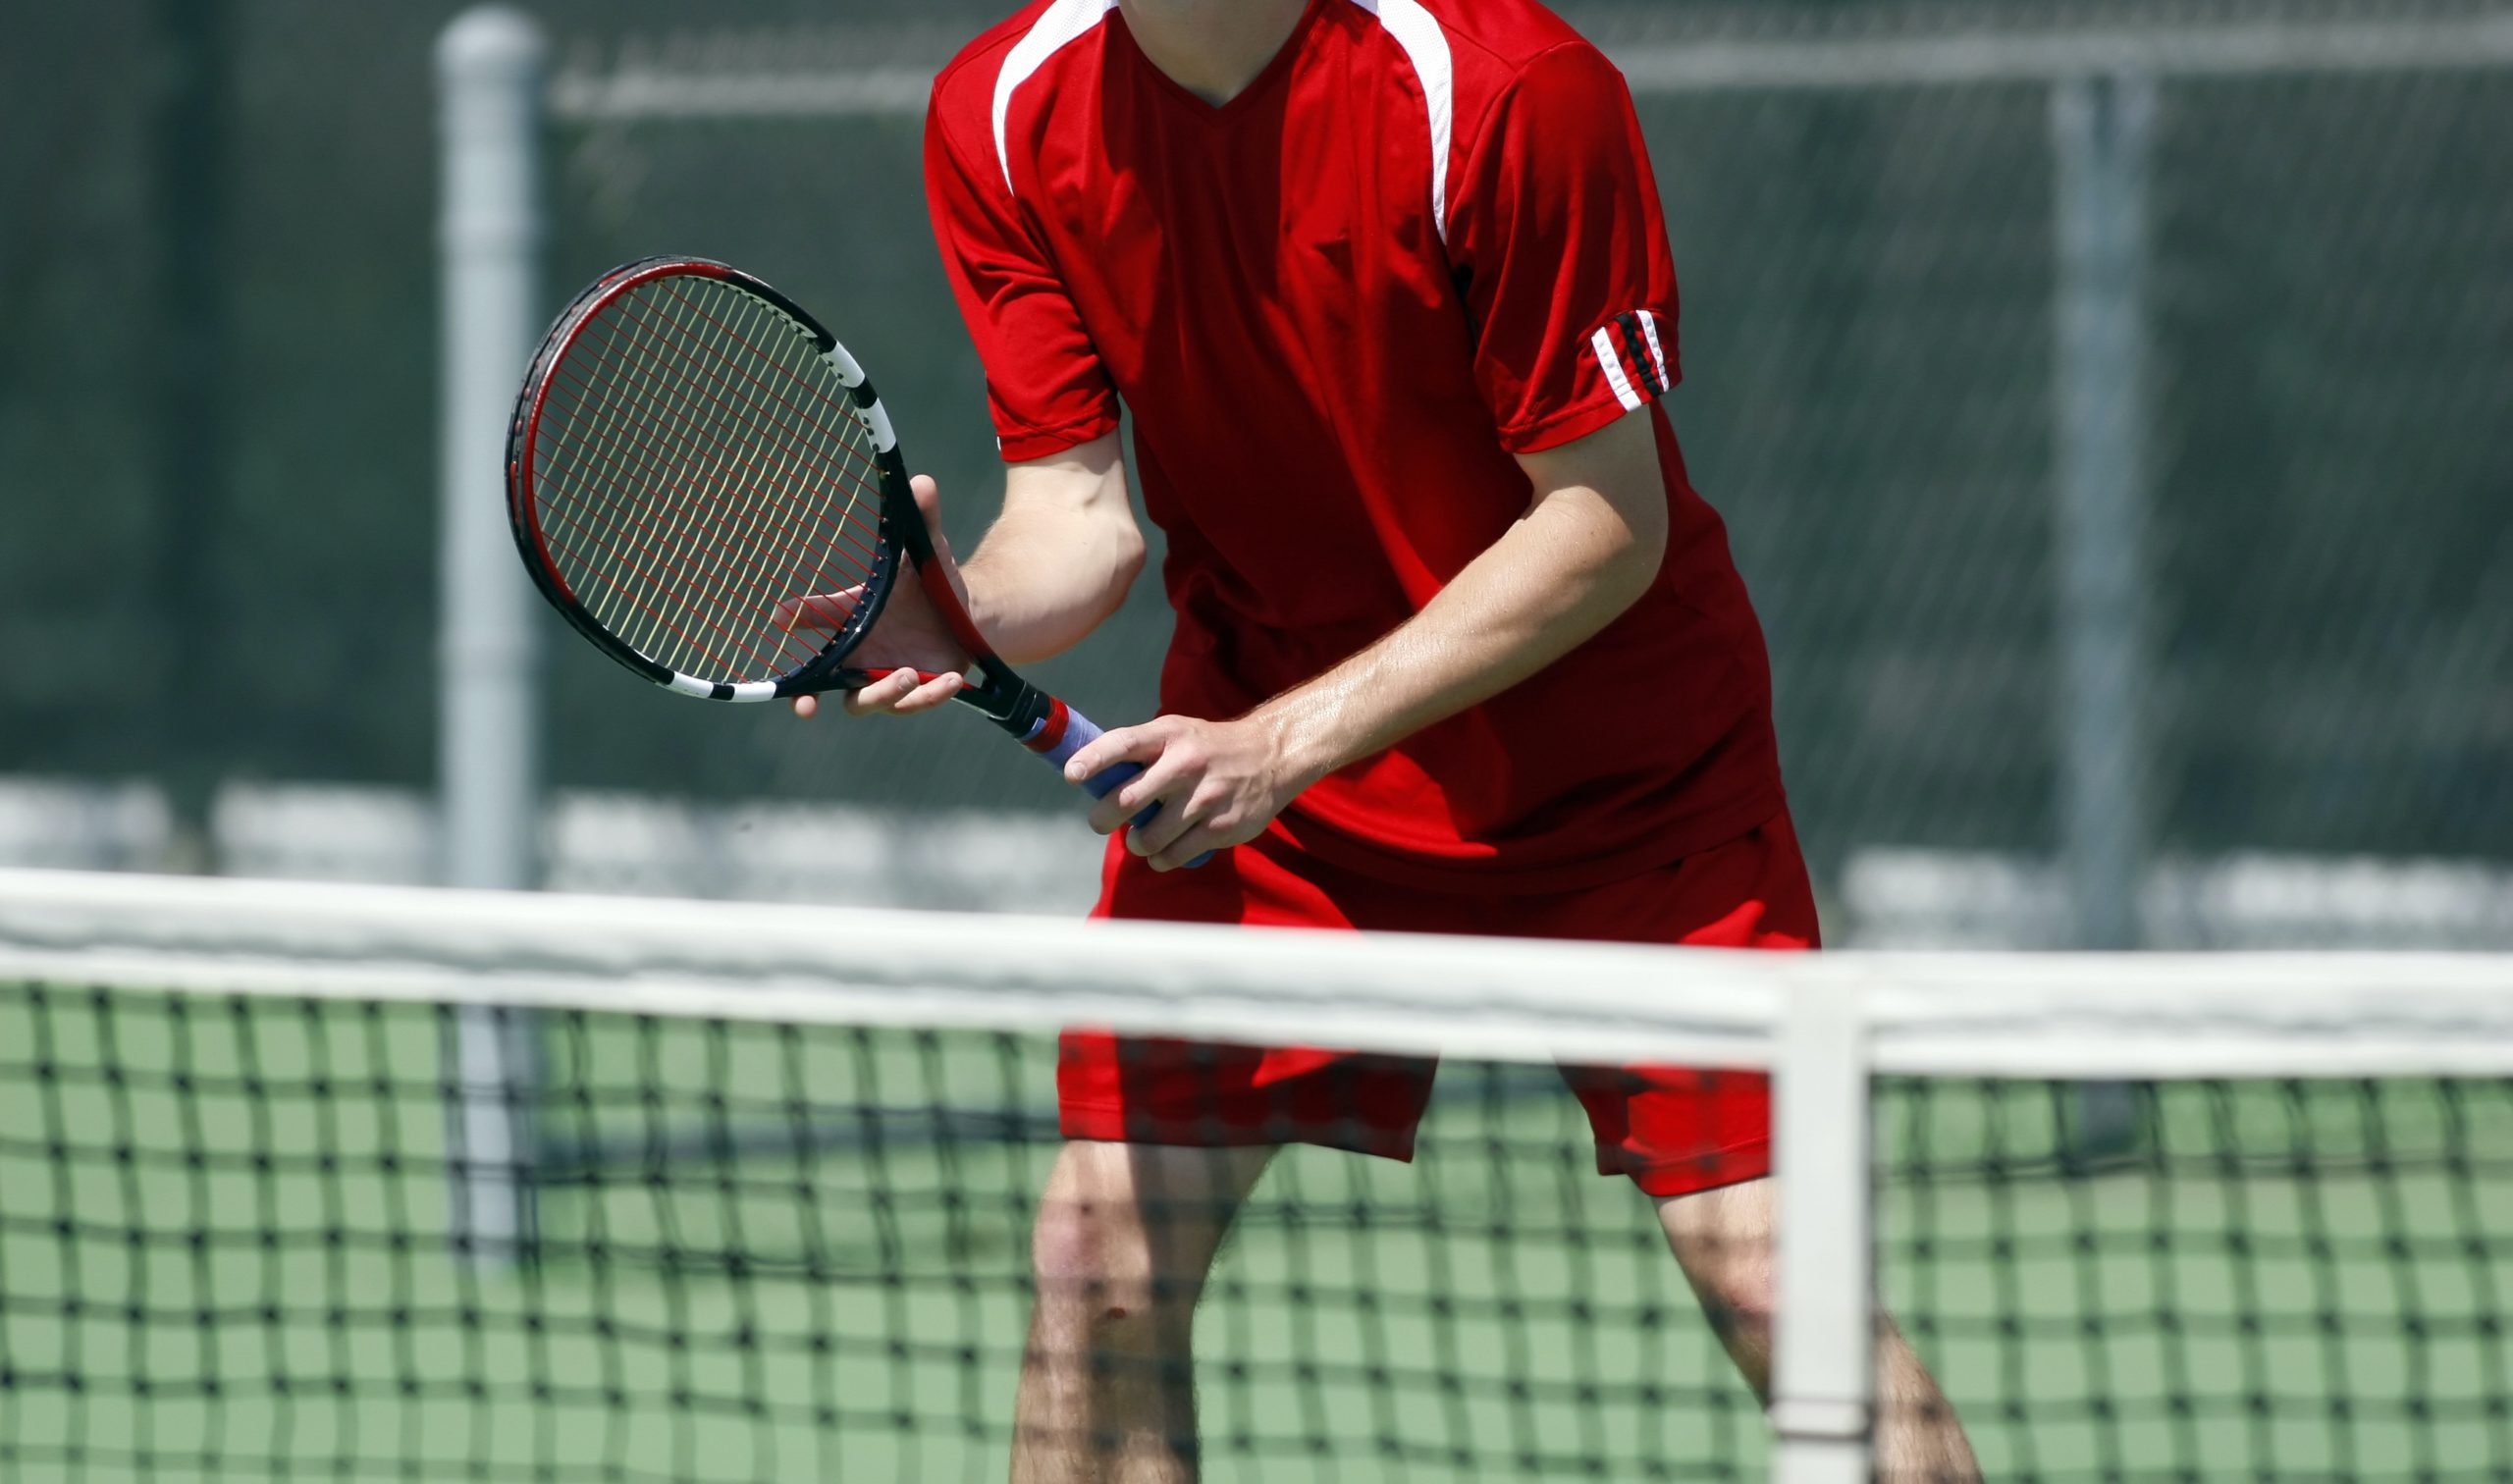 How to Recruited for Tennis | Admissions